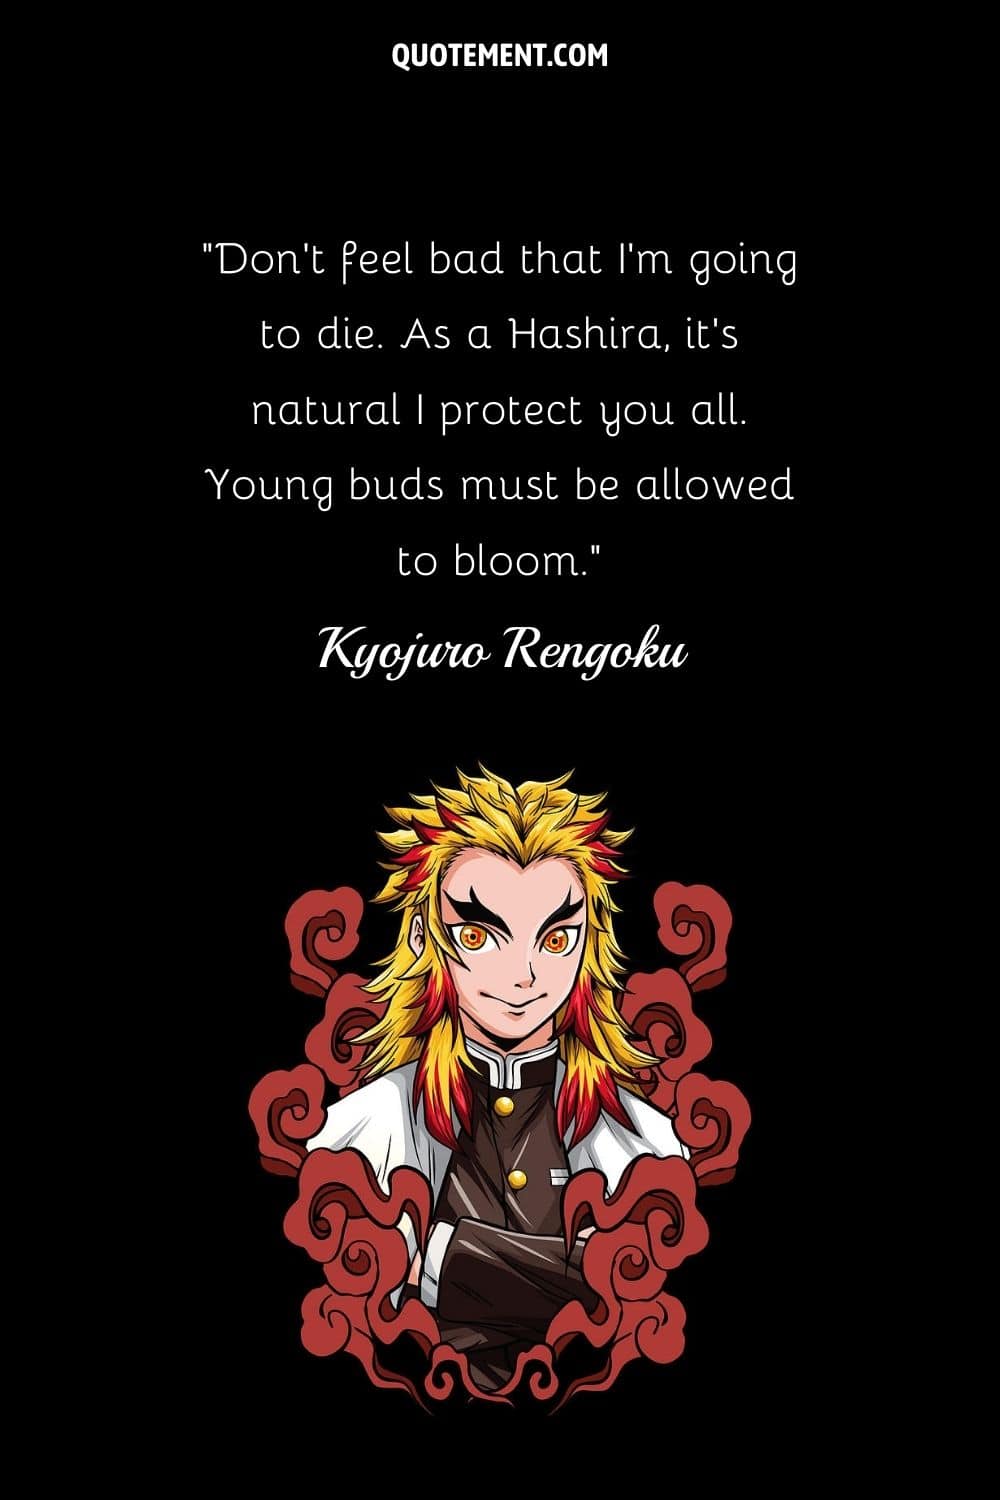 Don’t feel bad that I’m going to die. As a Hashira, it’s natural I protect you all